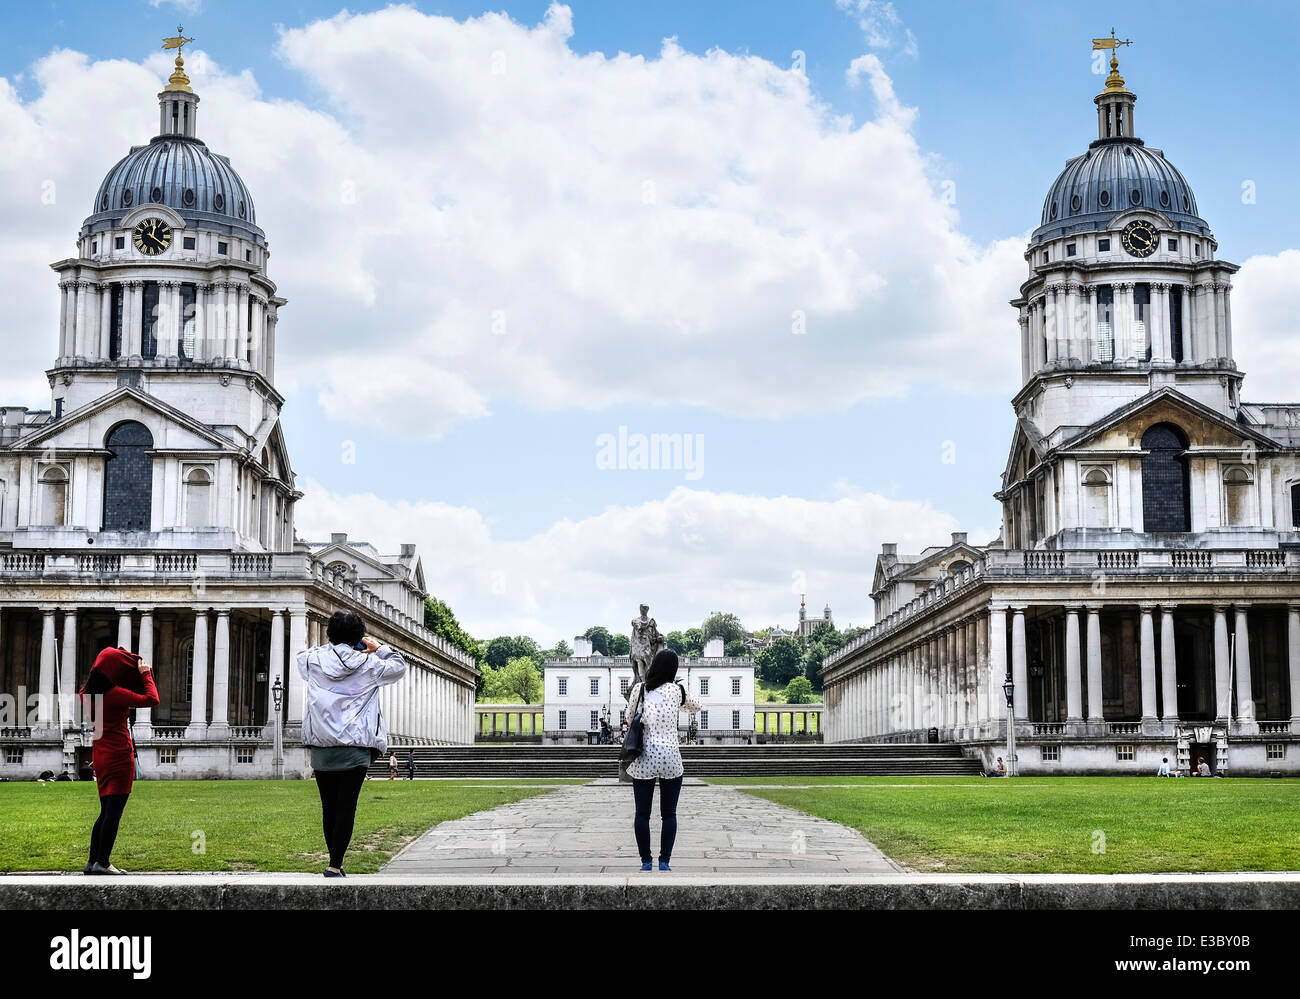 The Old Royal Naval College in Greenwich. Stock Photo